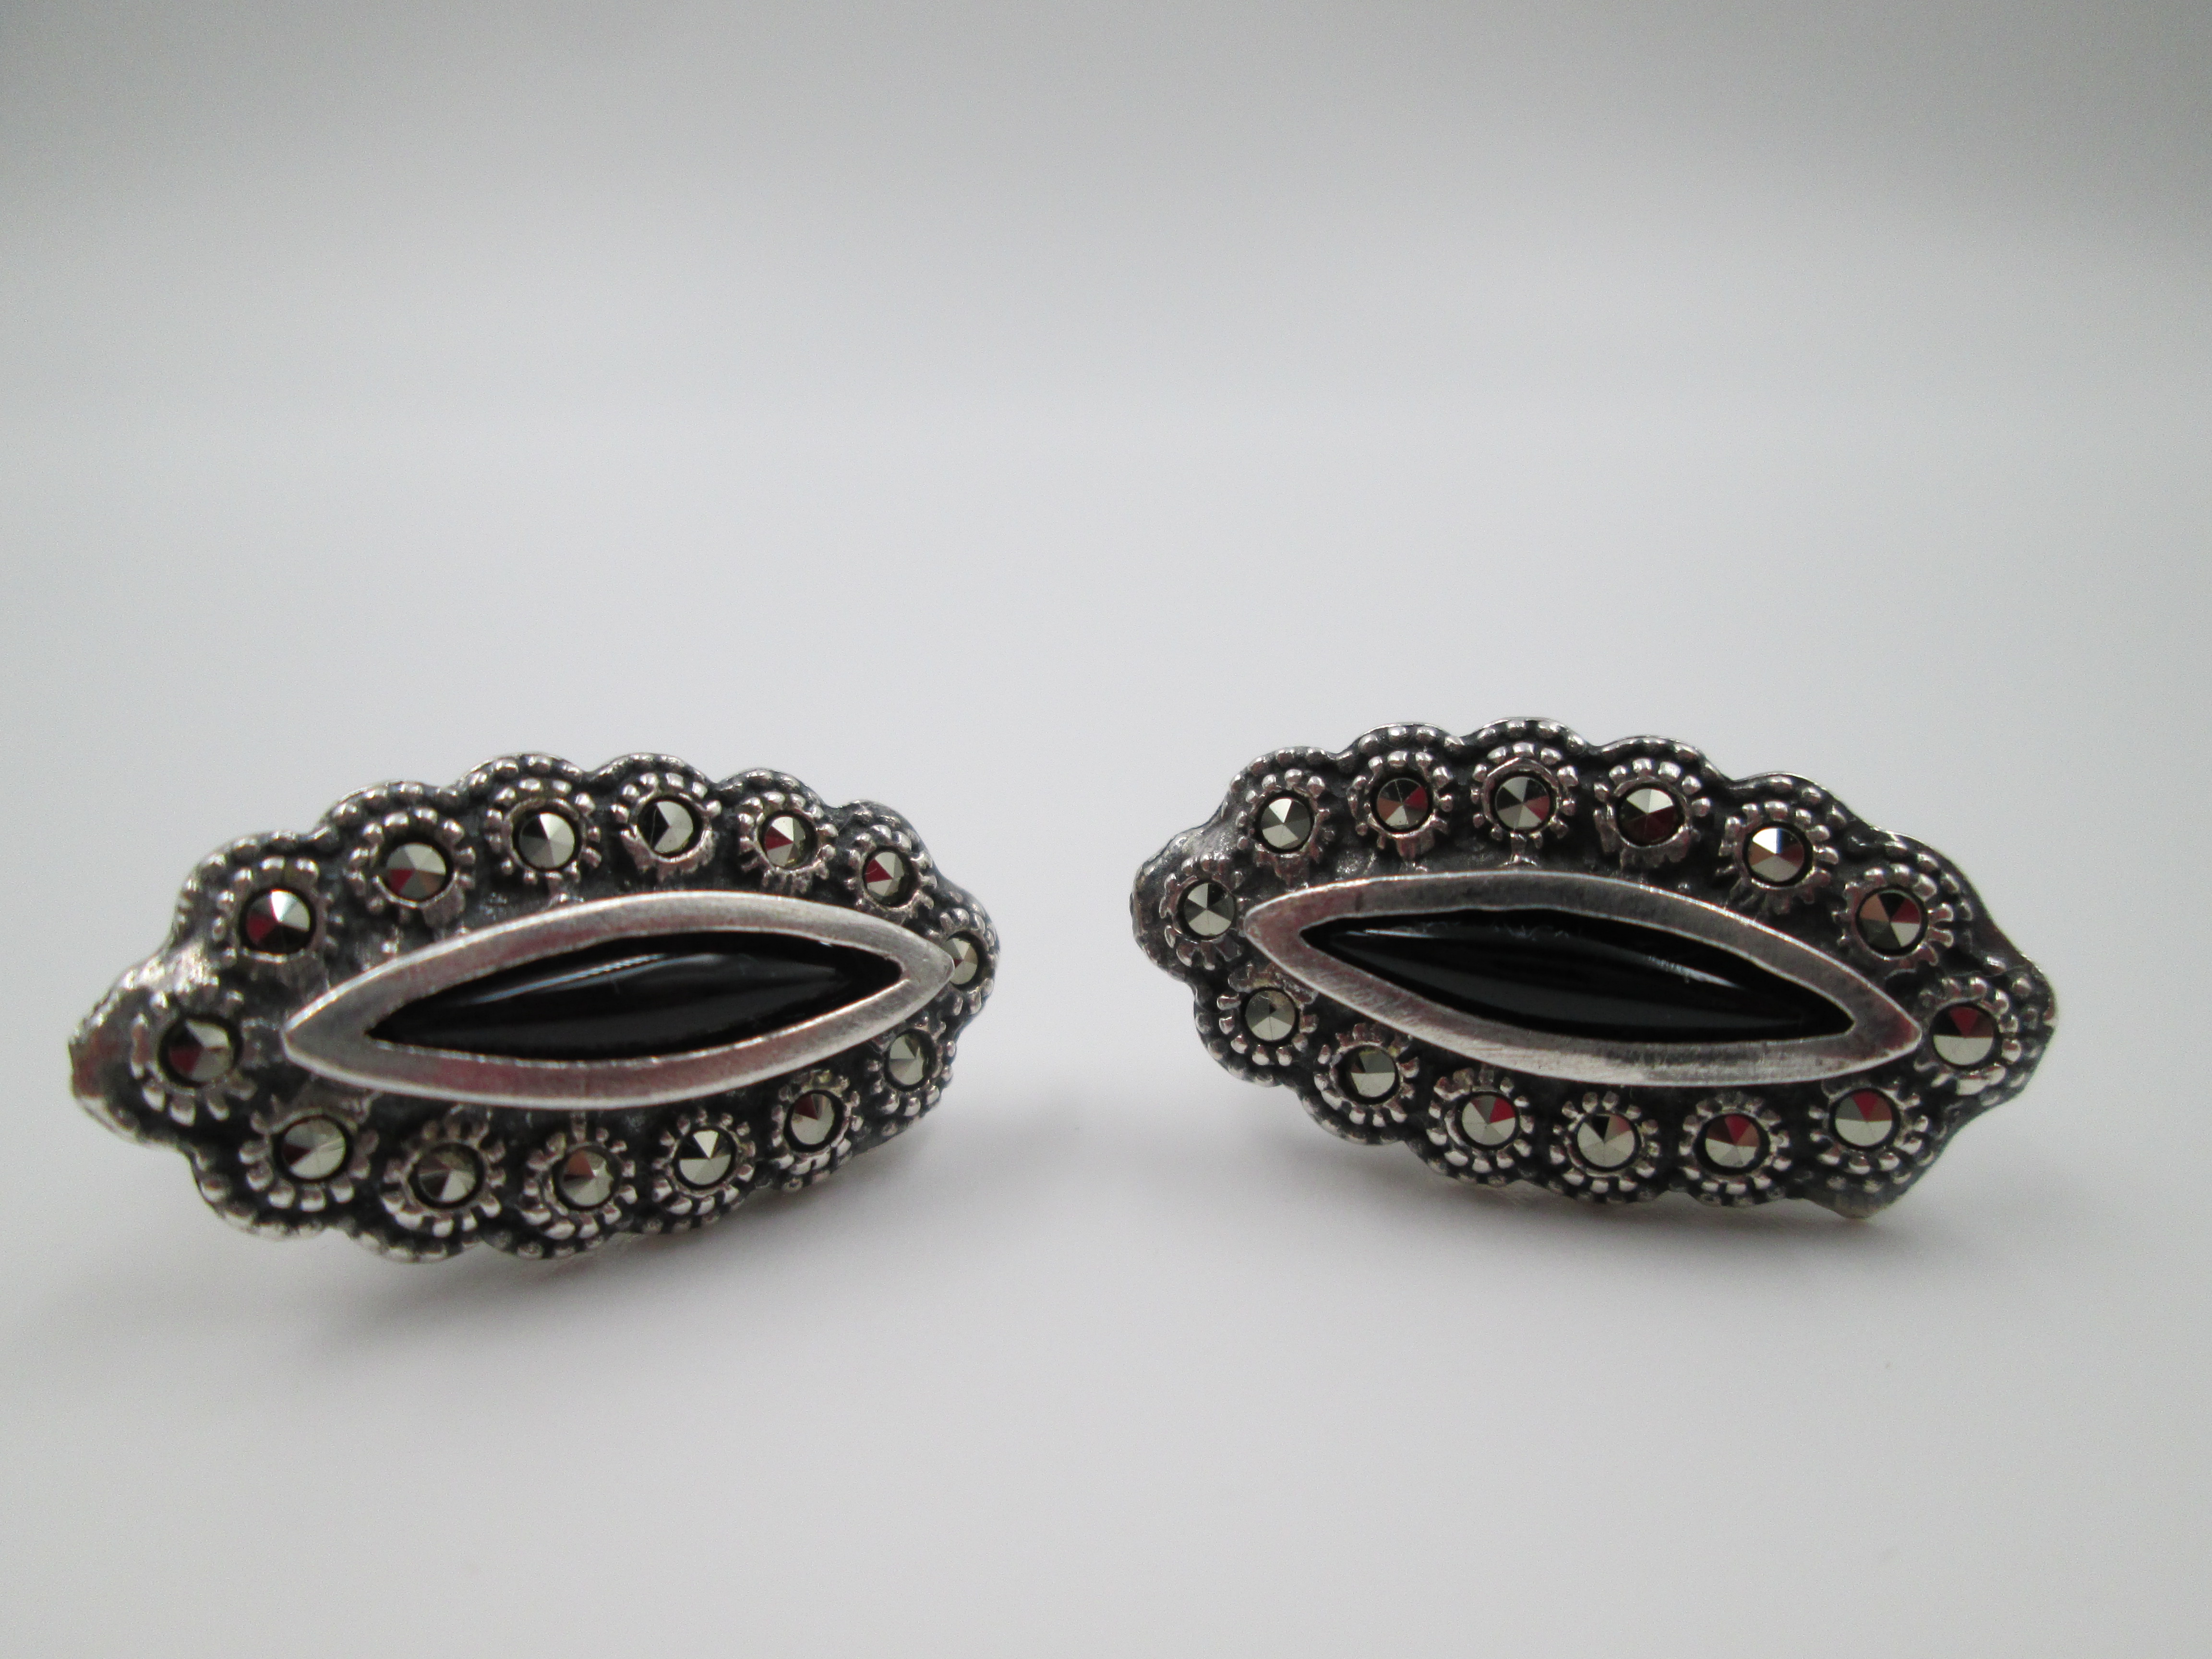 Sterling Silver Earrings Marcasites And Black Gems 1970s